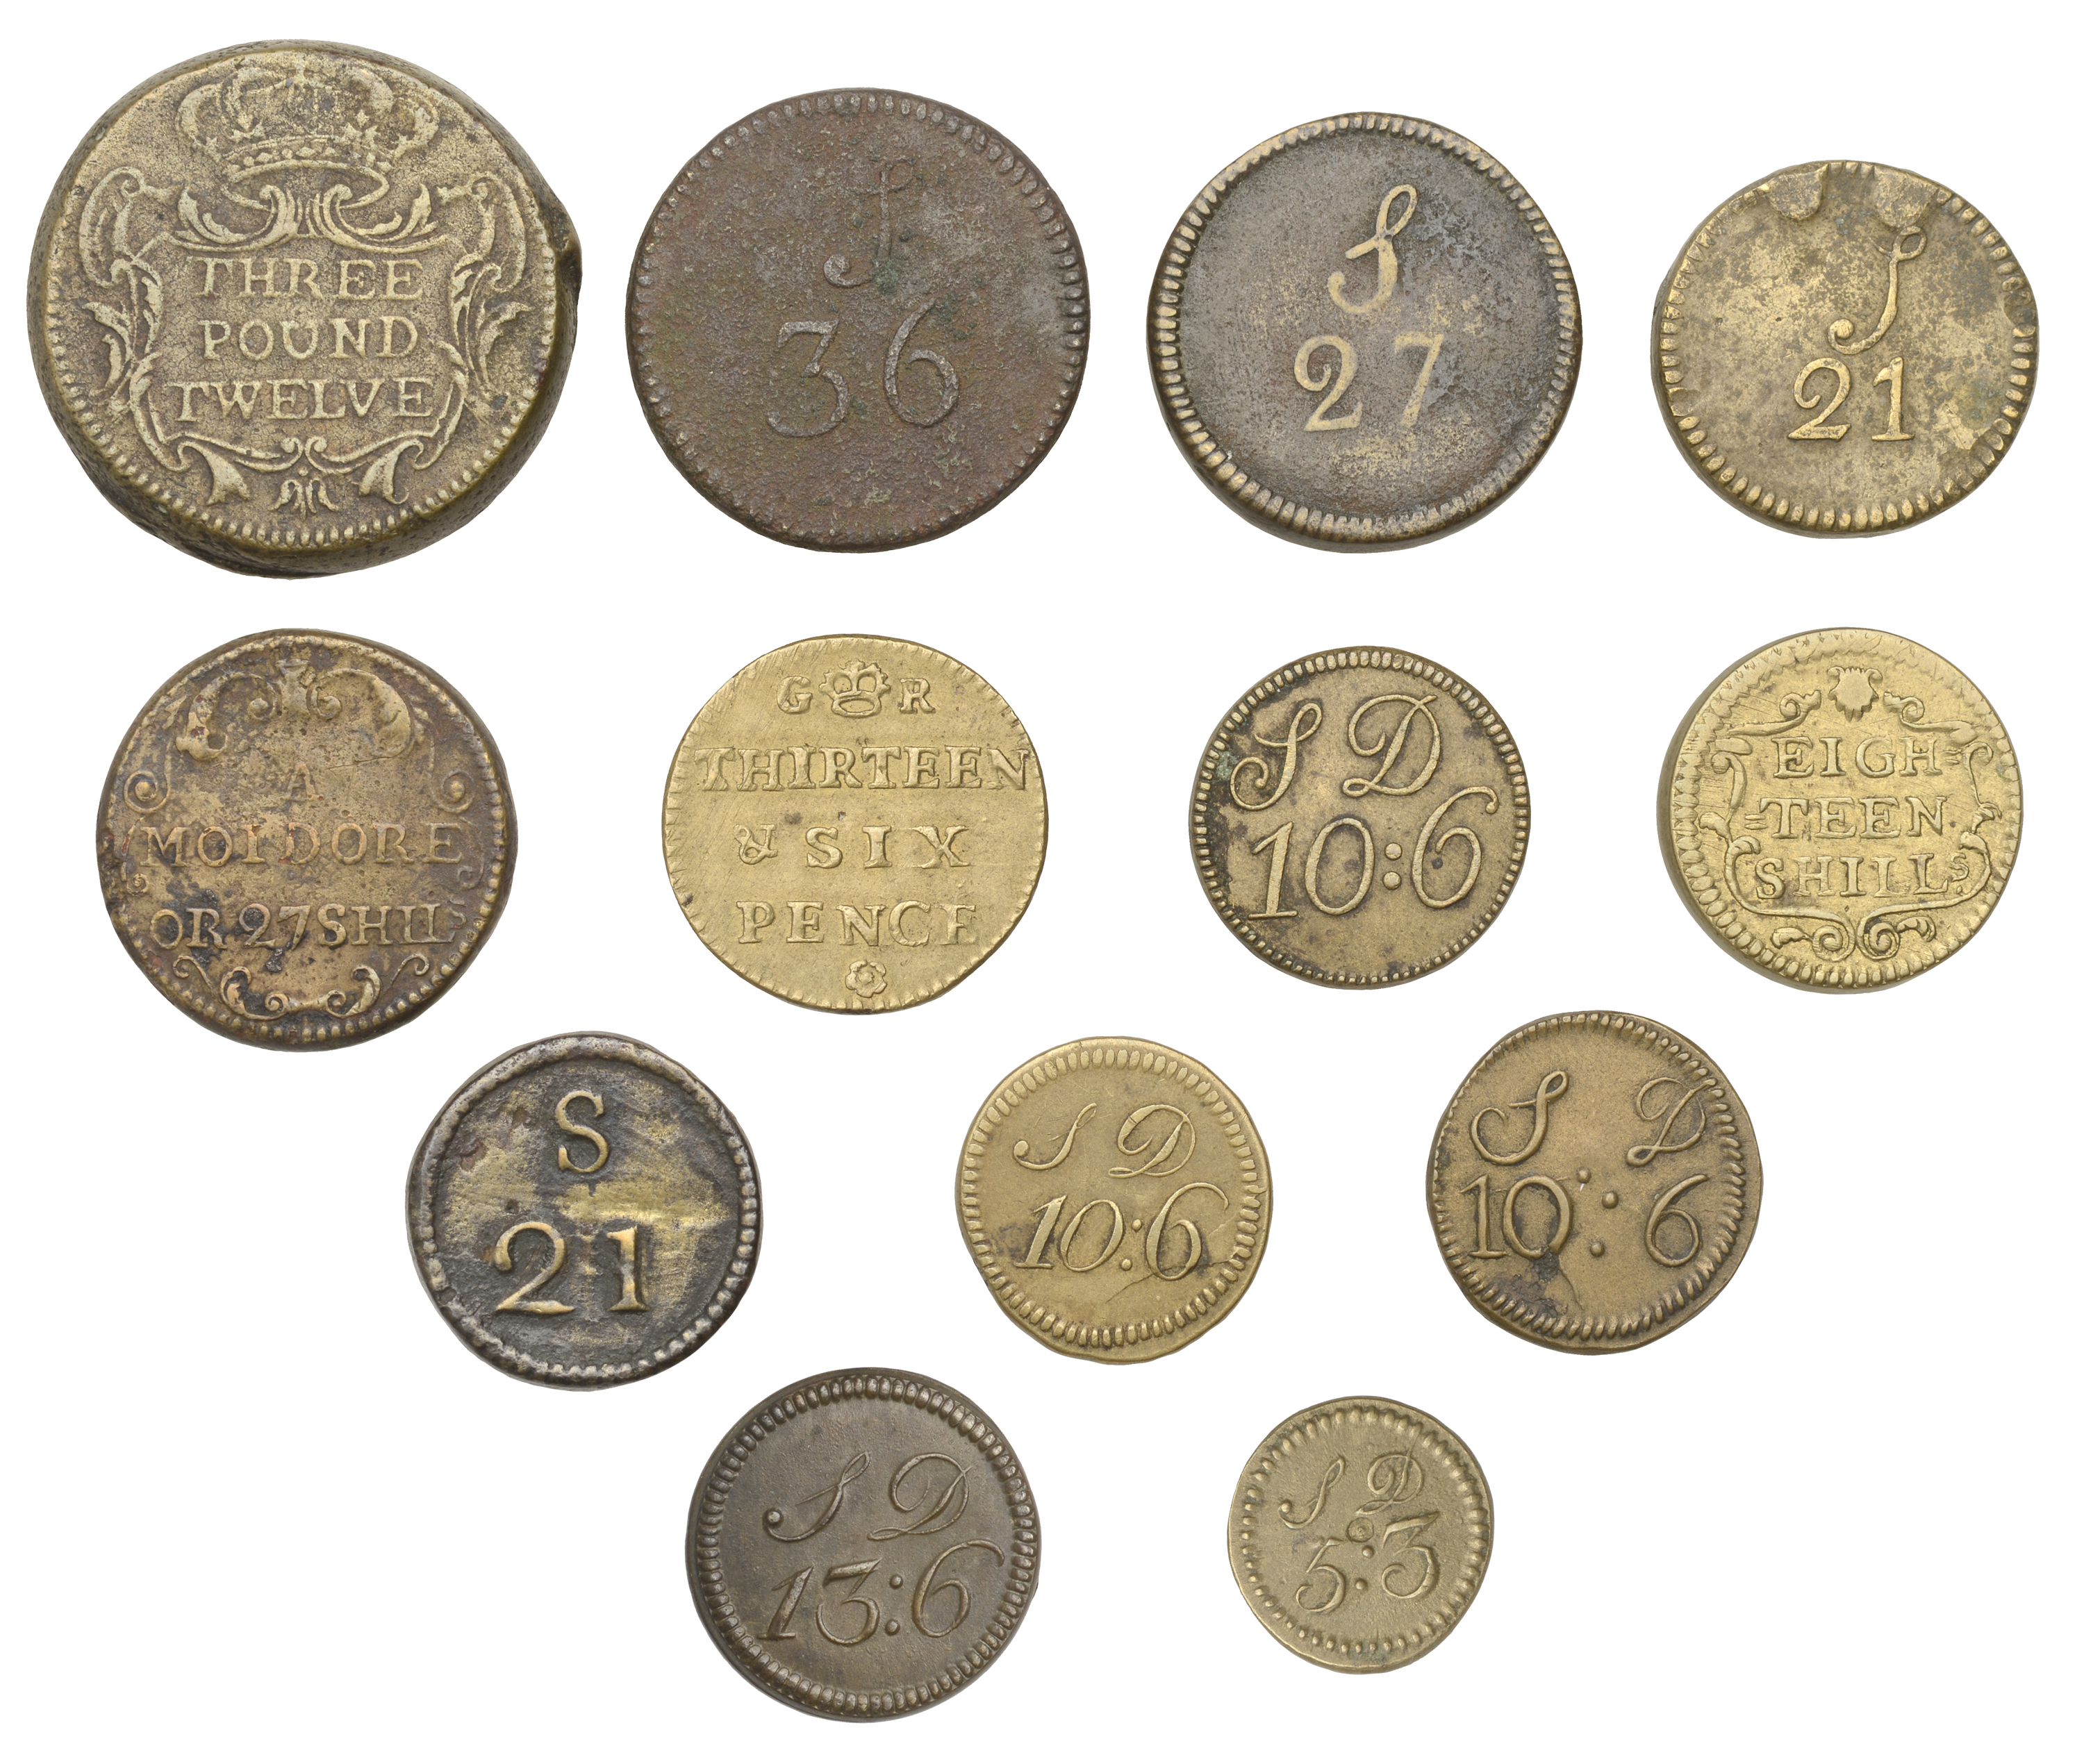 Coin weights: Portuguese series, Three Pounds Twelve Shillings (W 1614), Moidore or 27 Shill...